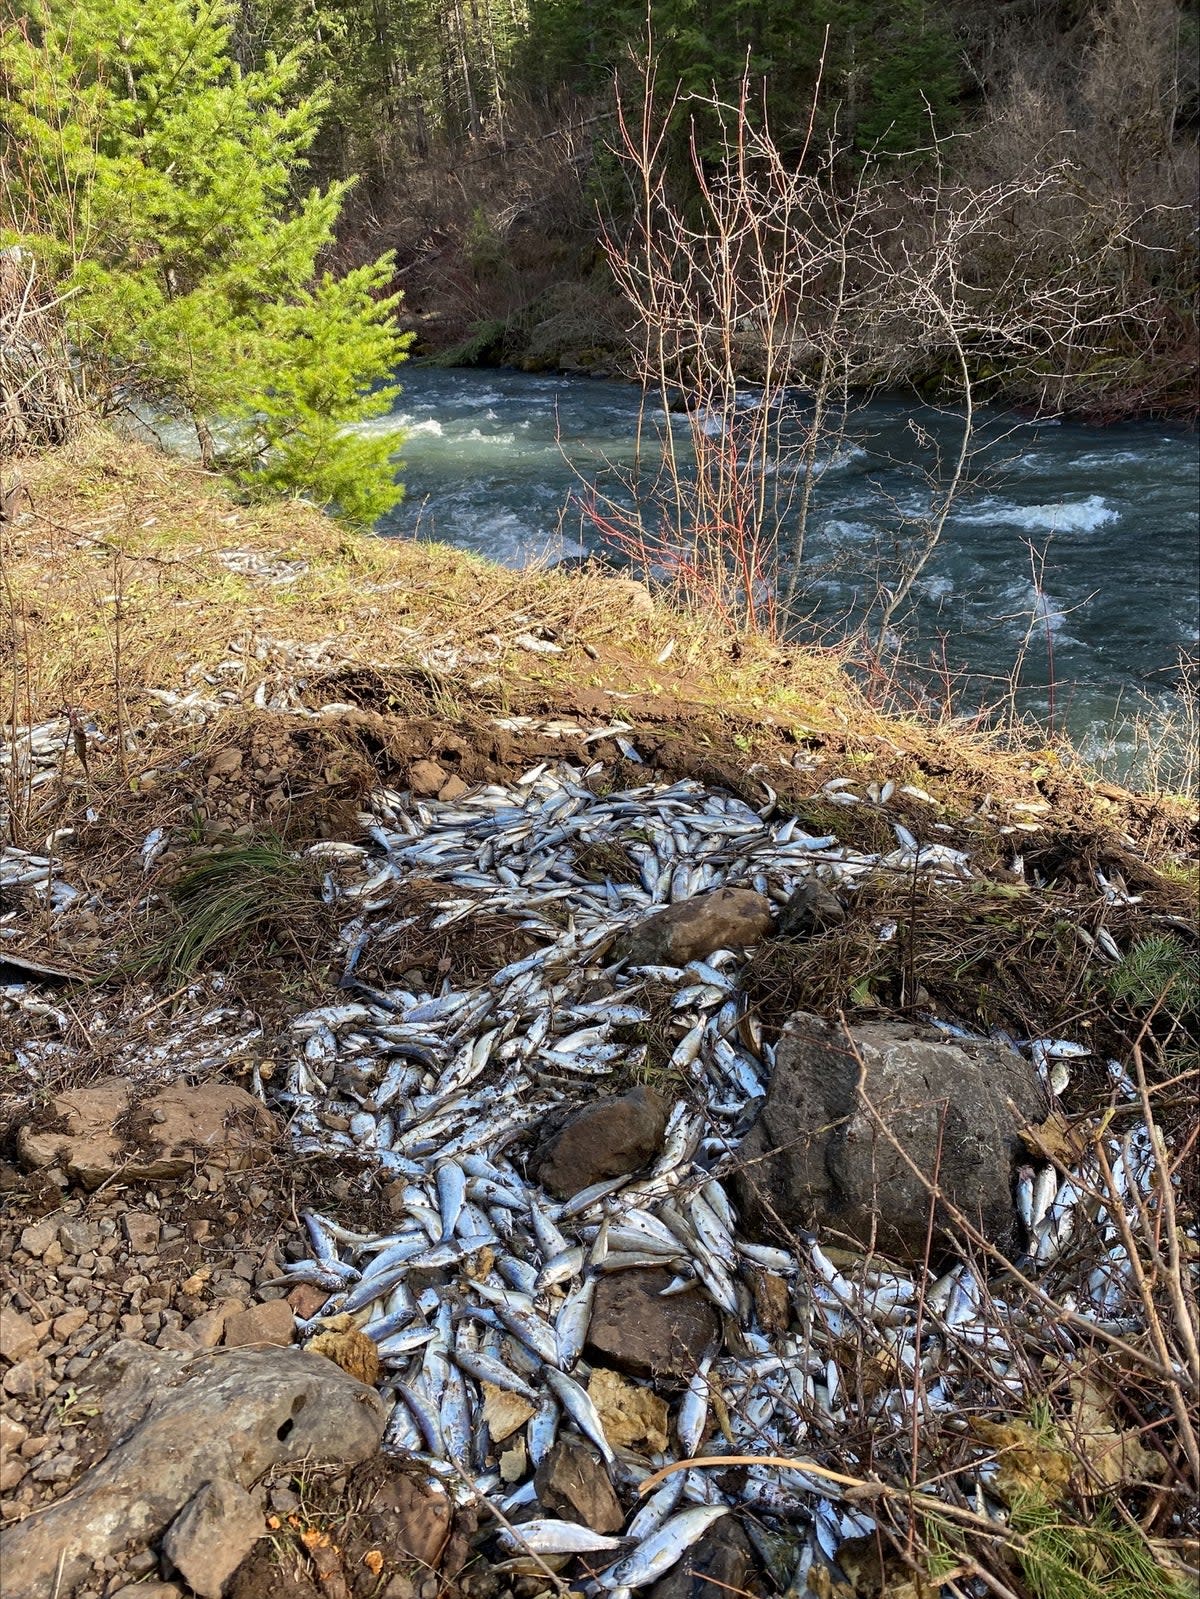 The accident will case a 20 per cent reduction in adults returning to the river, but will not impact the department’s prodcution goals (US Fish and Wildlife Service)